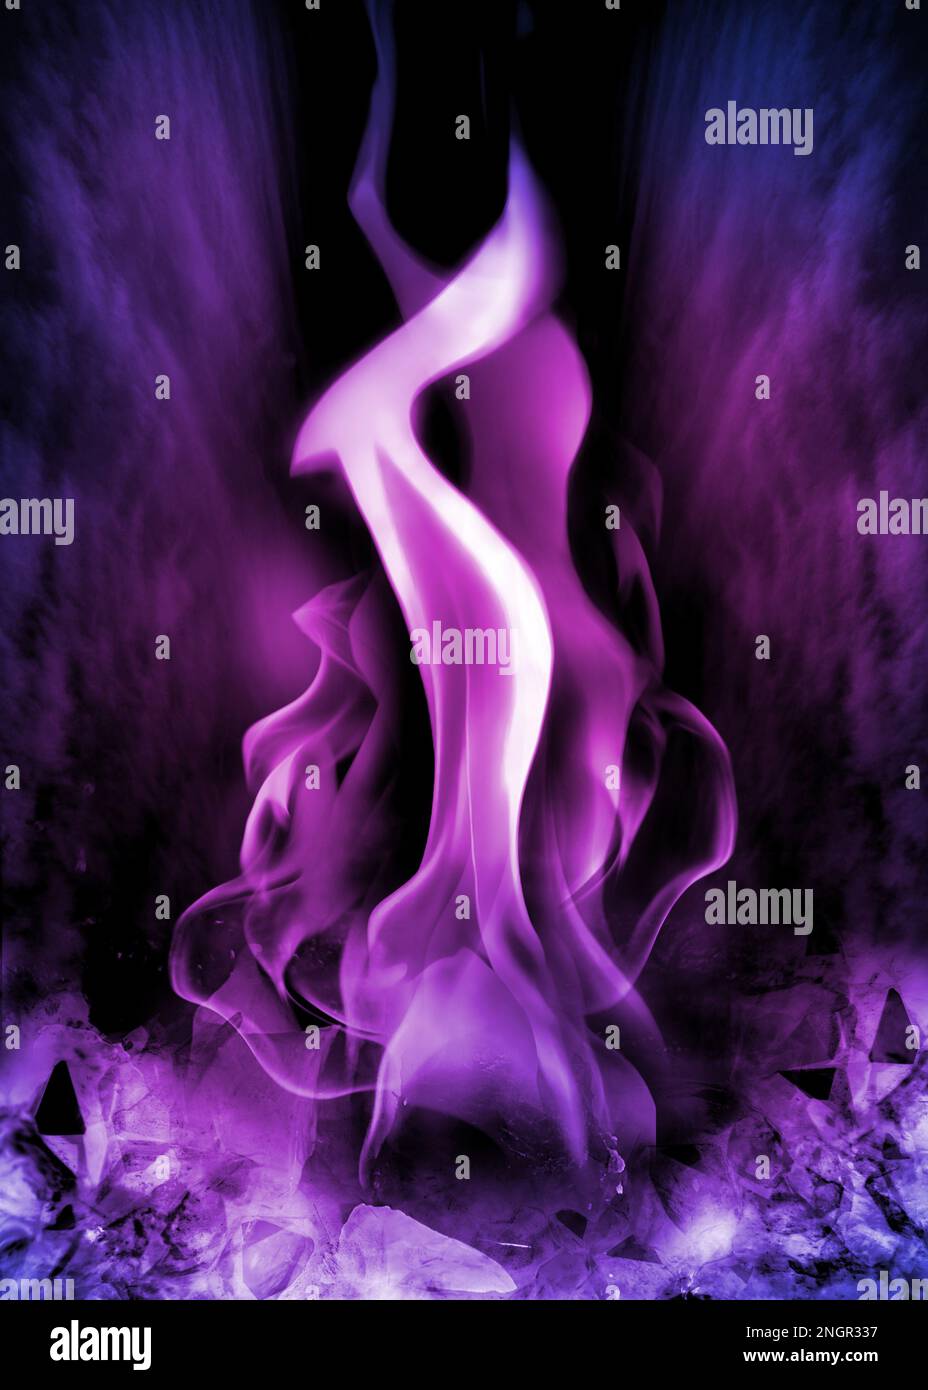 'The Violet Flame of Saint Germain' - Divine Energy & Transformation, Poster / Wallpaper Stock Photo